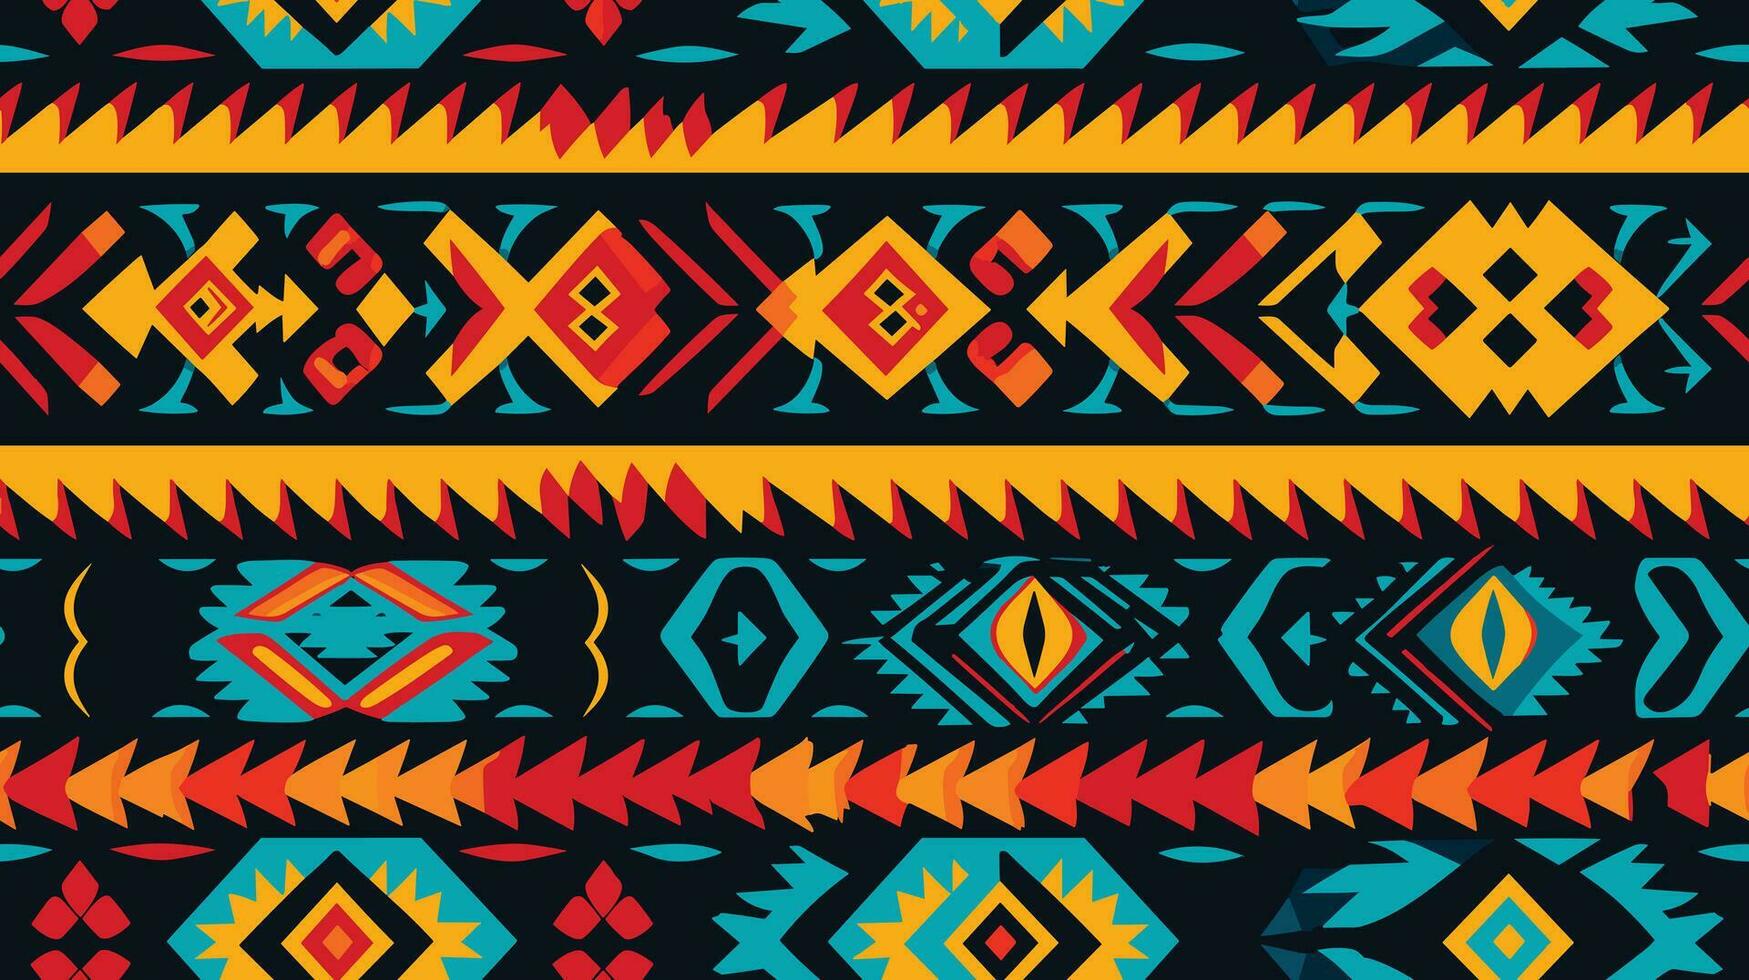 Ethnic abstract ikat art. Seamless pattern in tribal, folk embroidery, and Mexican style, illustration, flat-illustration vector